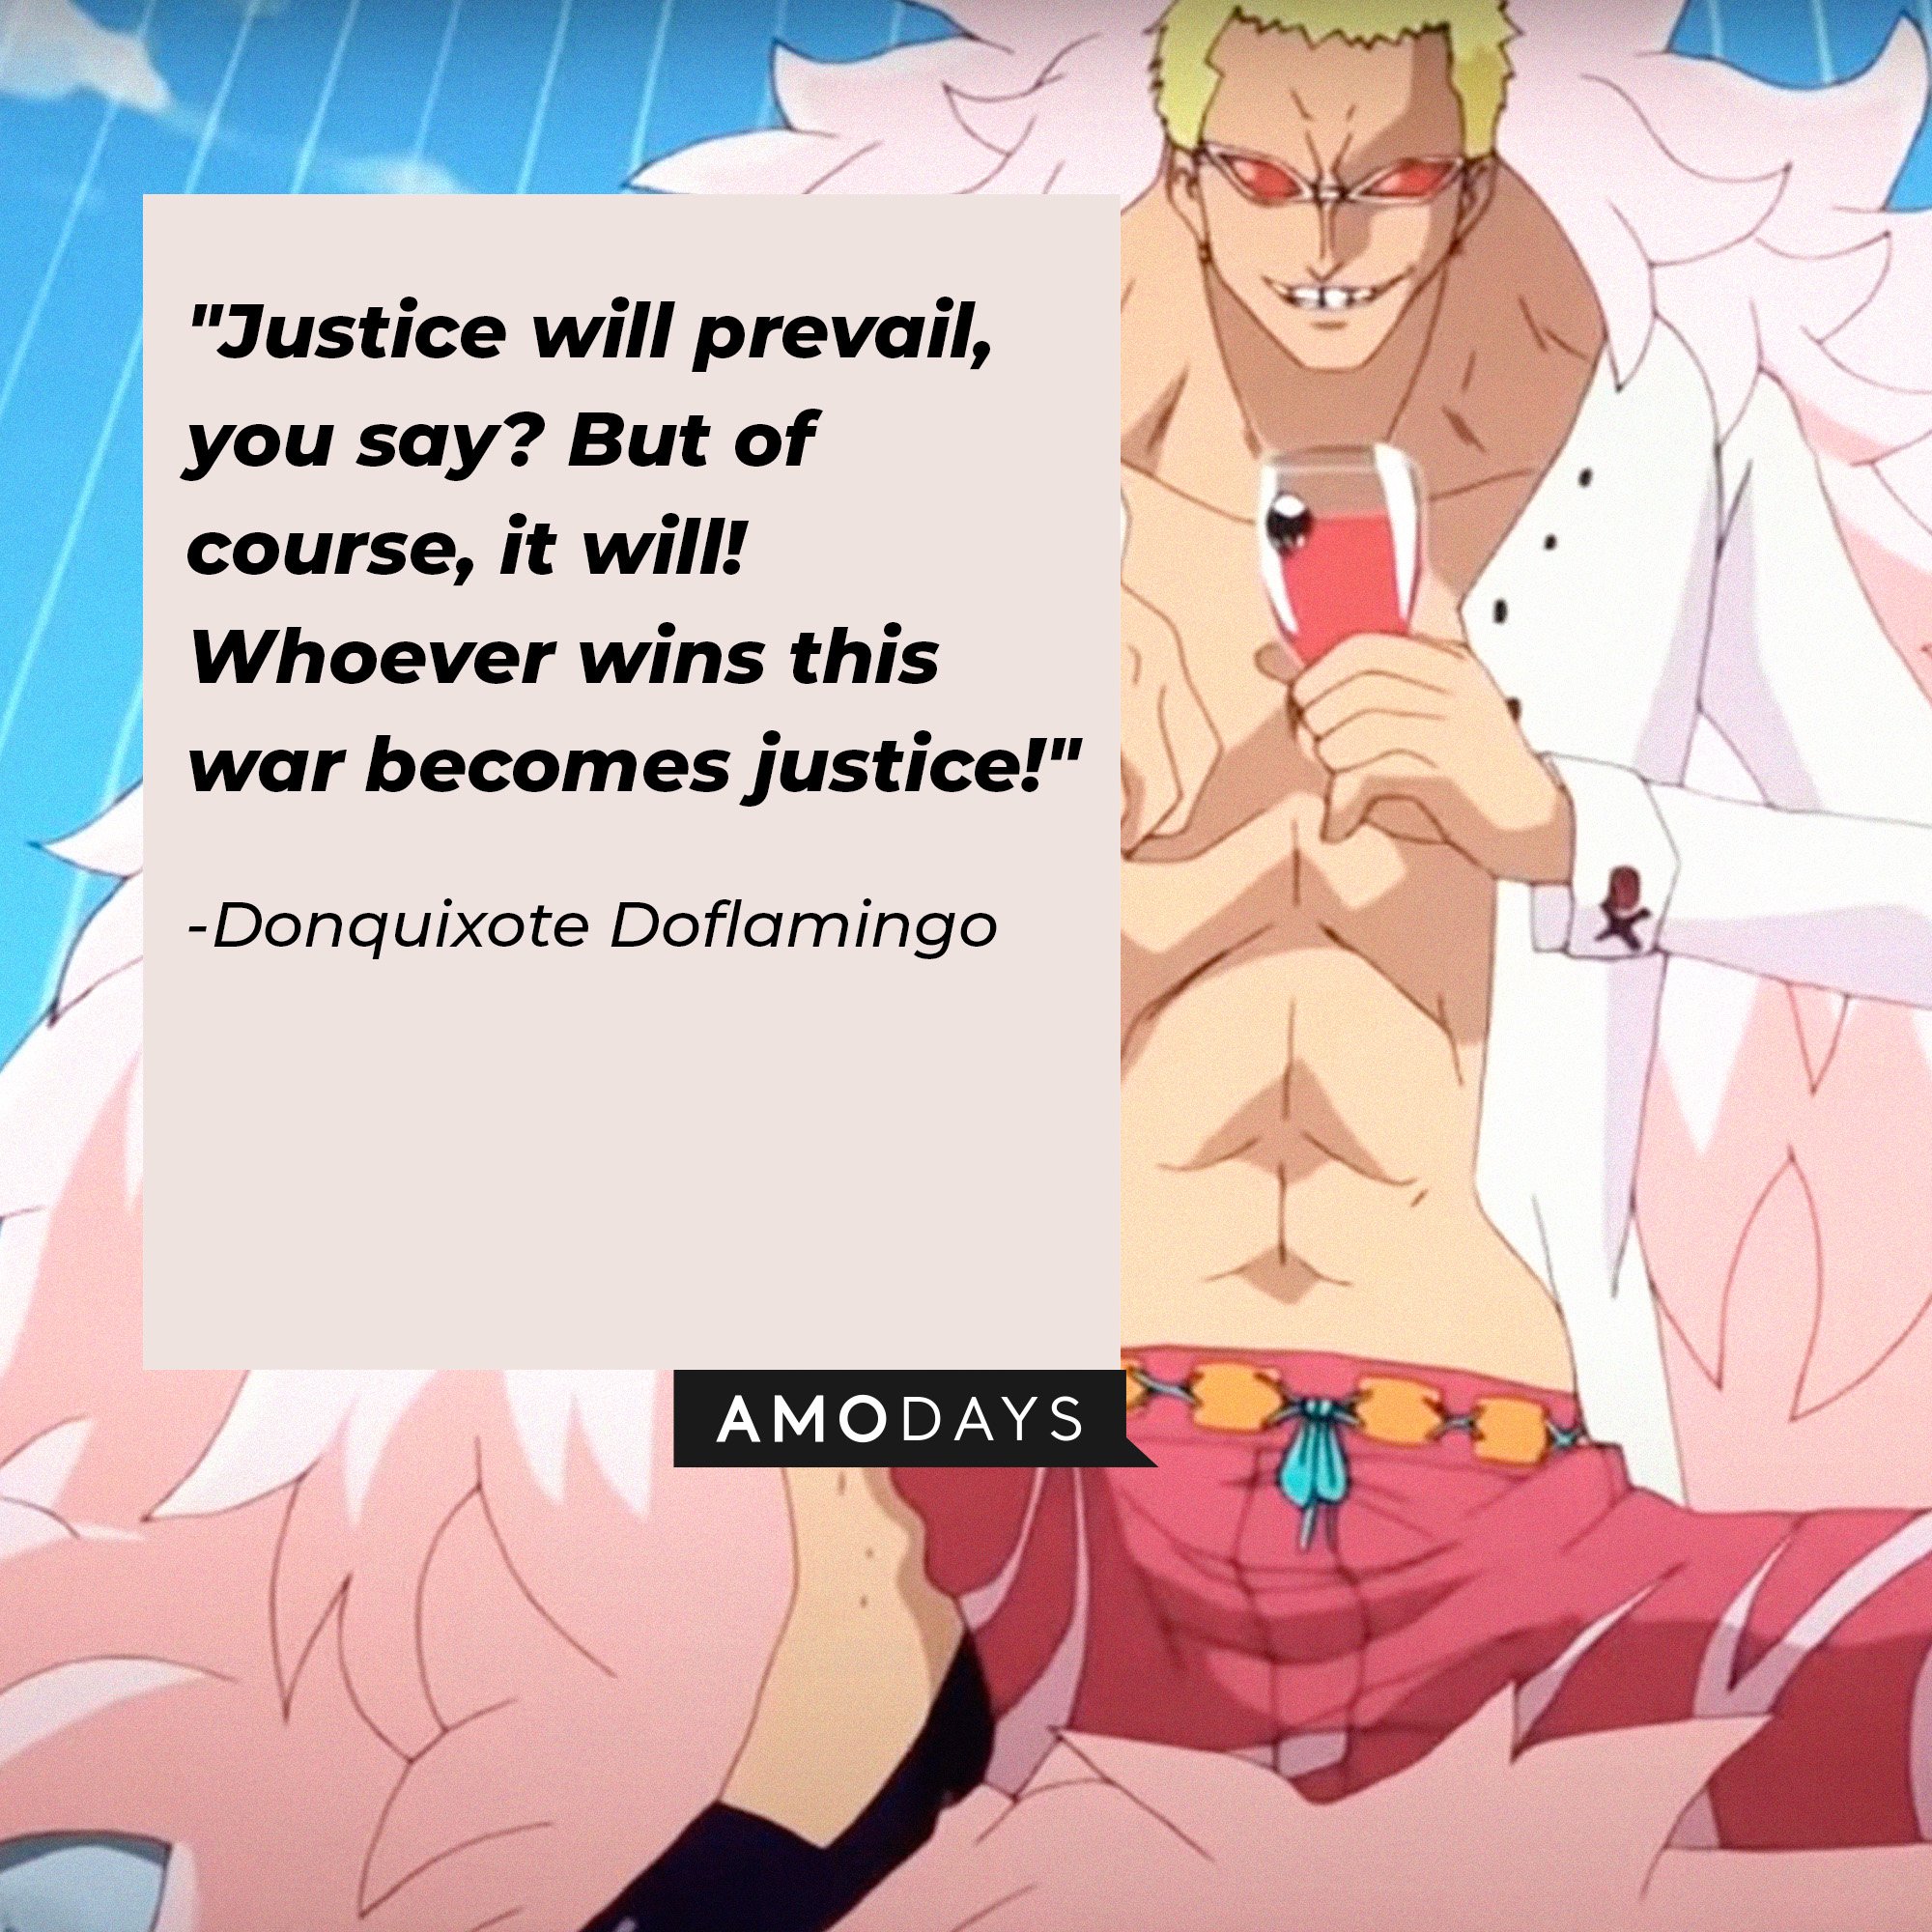     Donquixote Doflamingo’s quote: "Justice will prevail, you say? But of course it will! Whoever wins this war becomes justice!” | Image: AmoDays